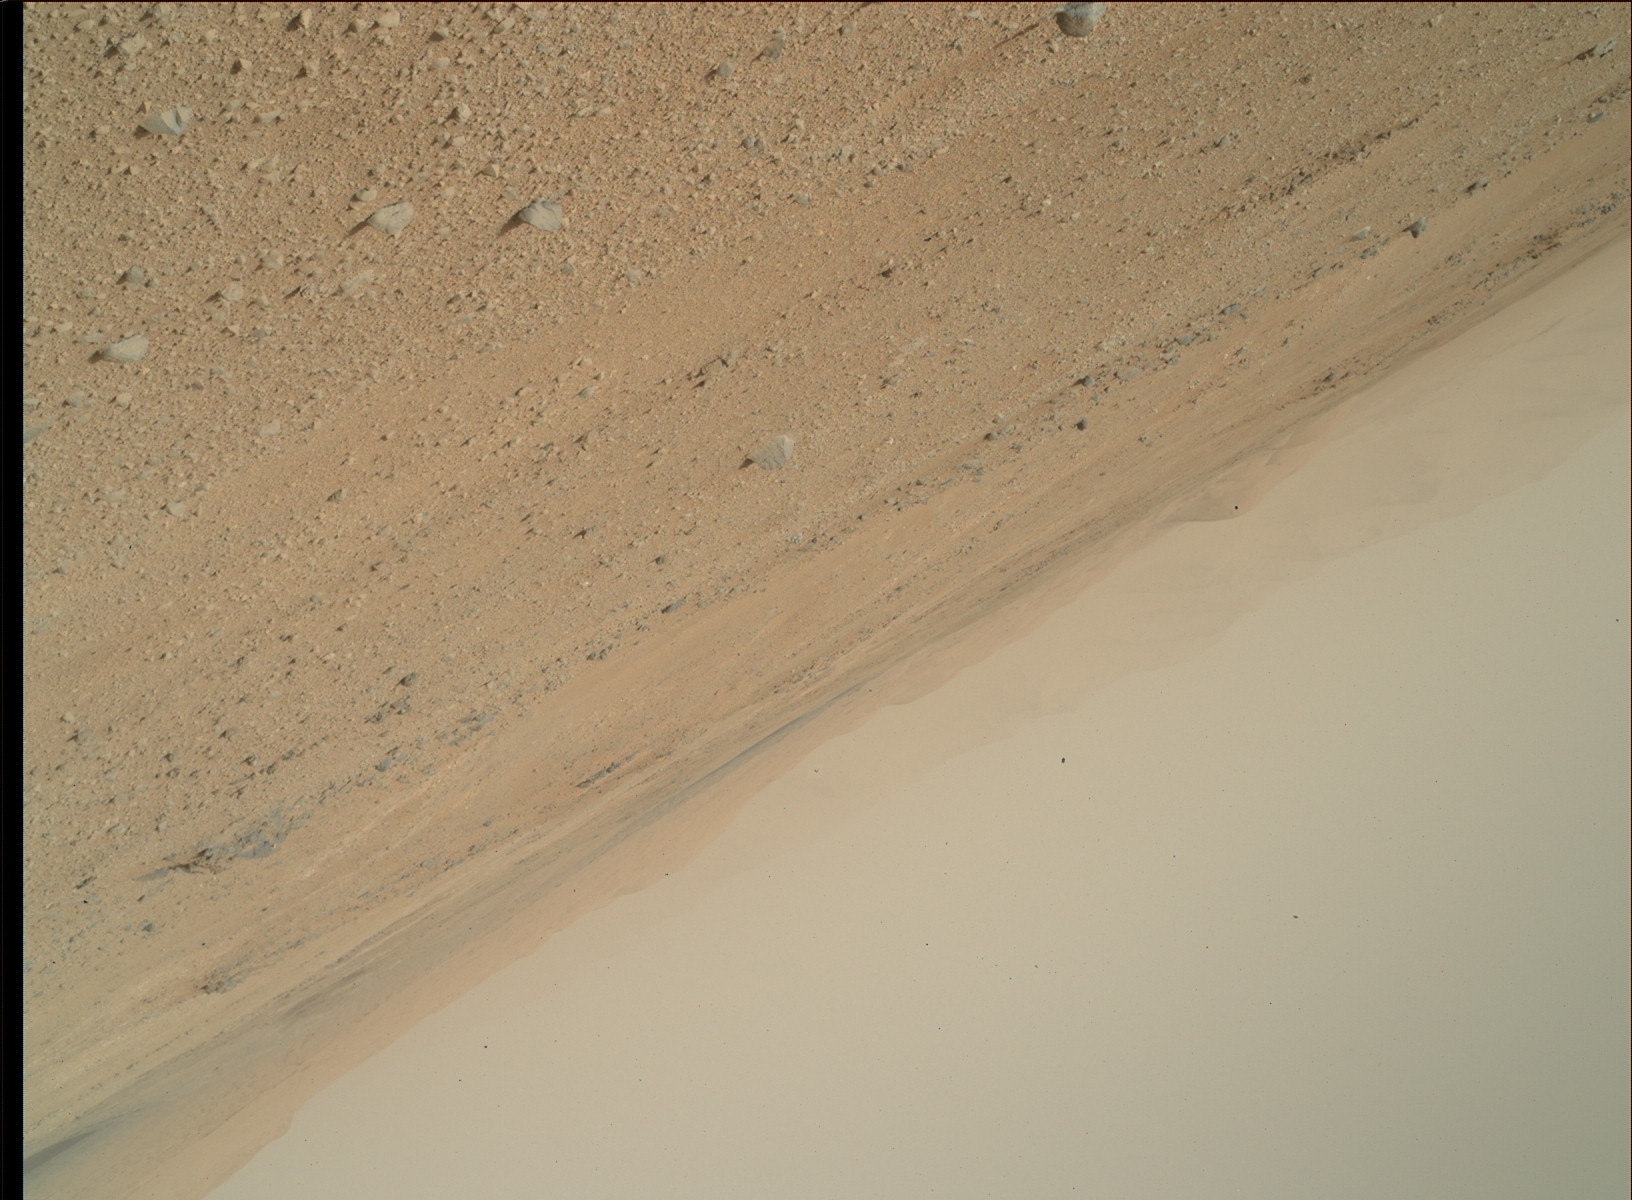 Nasa's Mars rover Curiosity acquired this image using its Mars Hand Lens Imager (MAHLI) on Sol 419